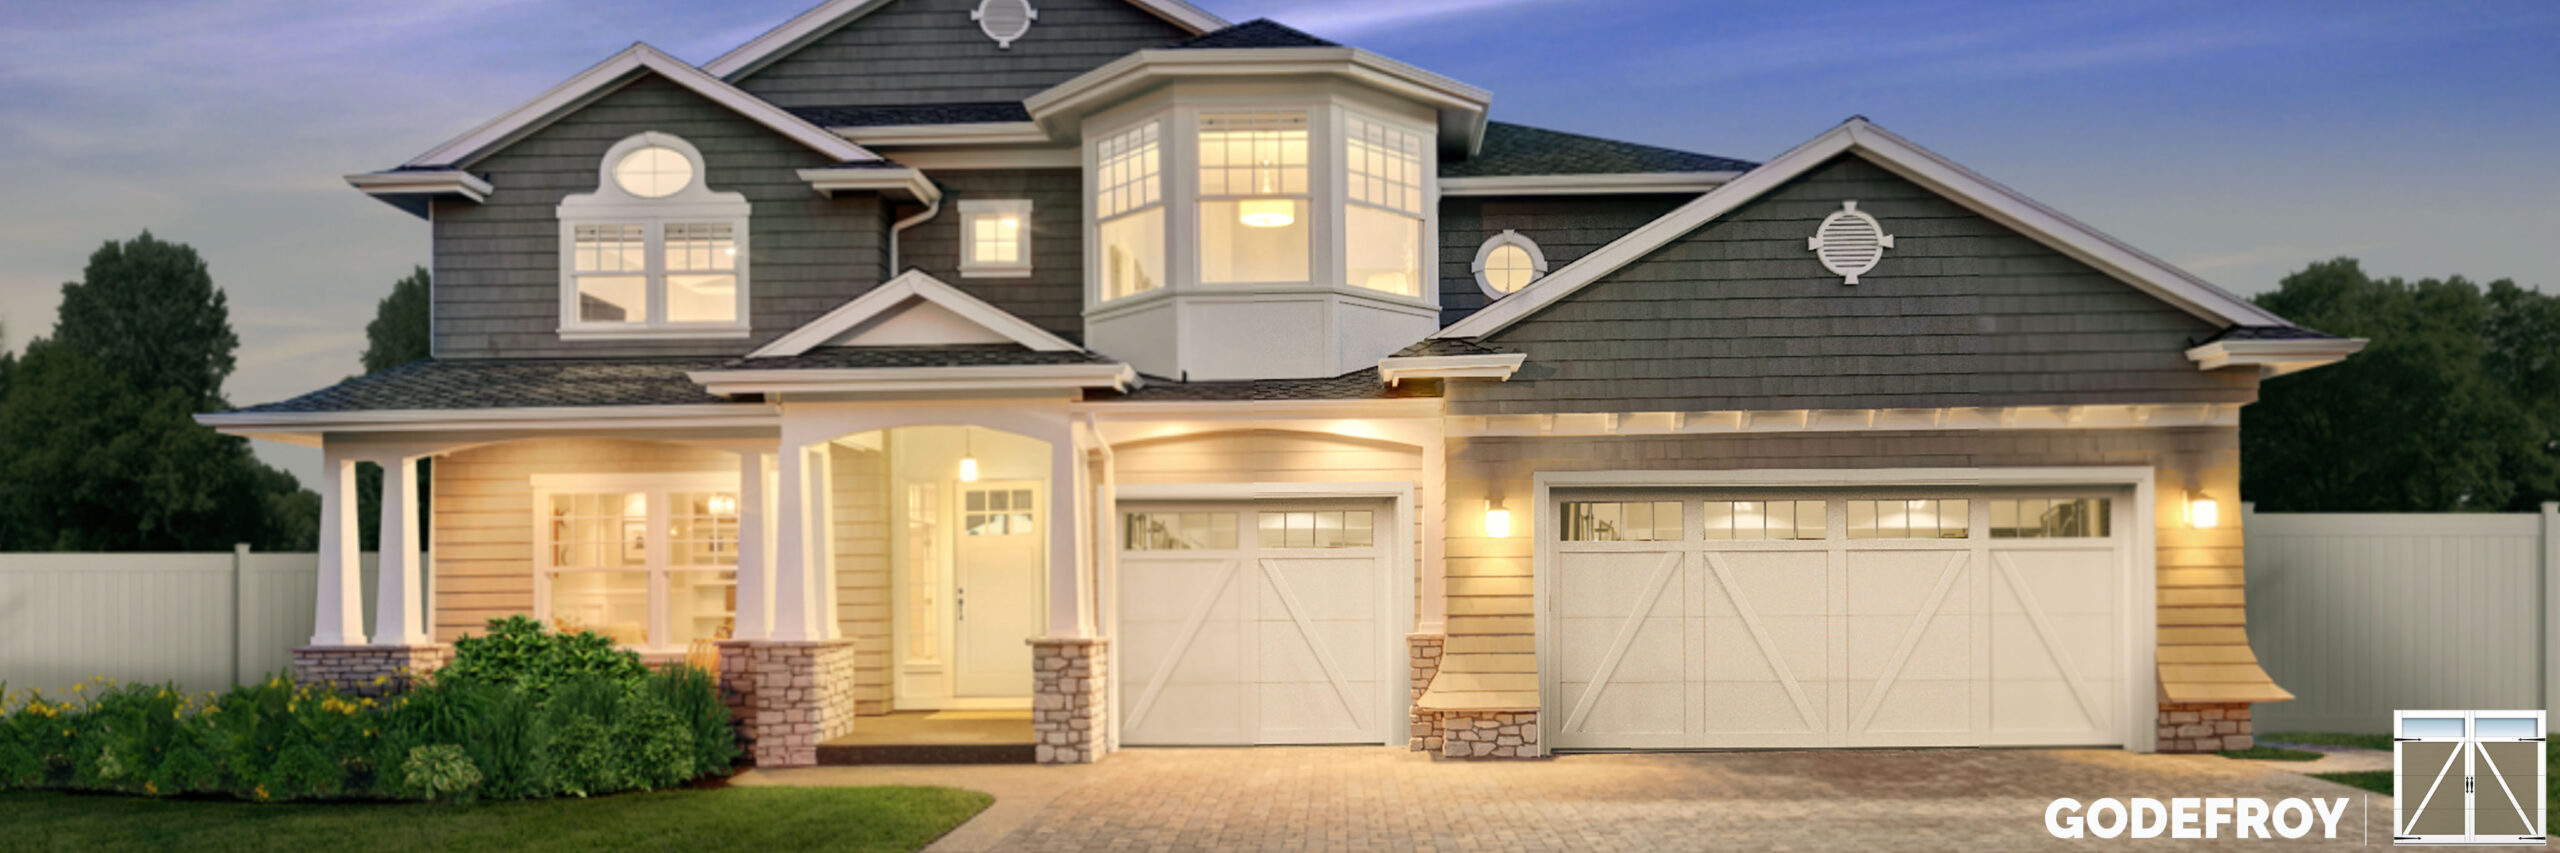 godefroy carriage house style garage door by garex scaled